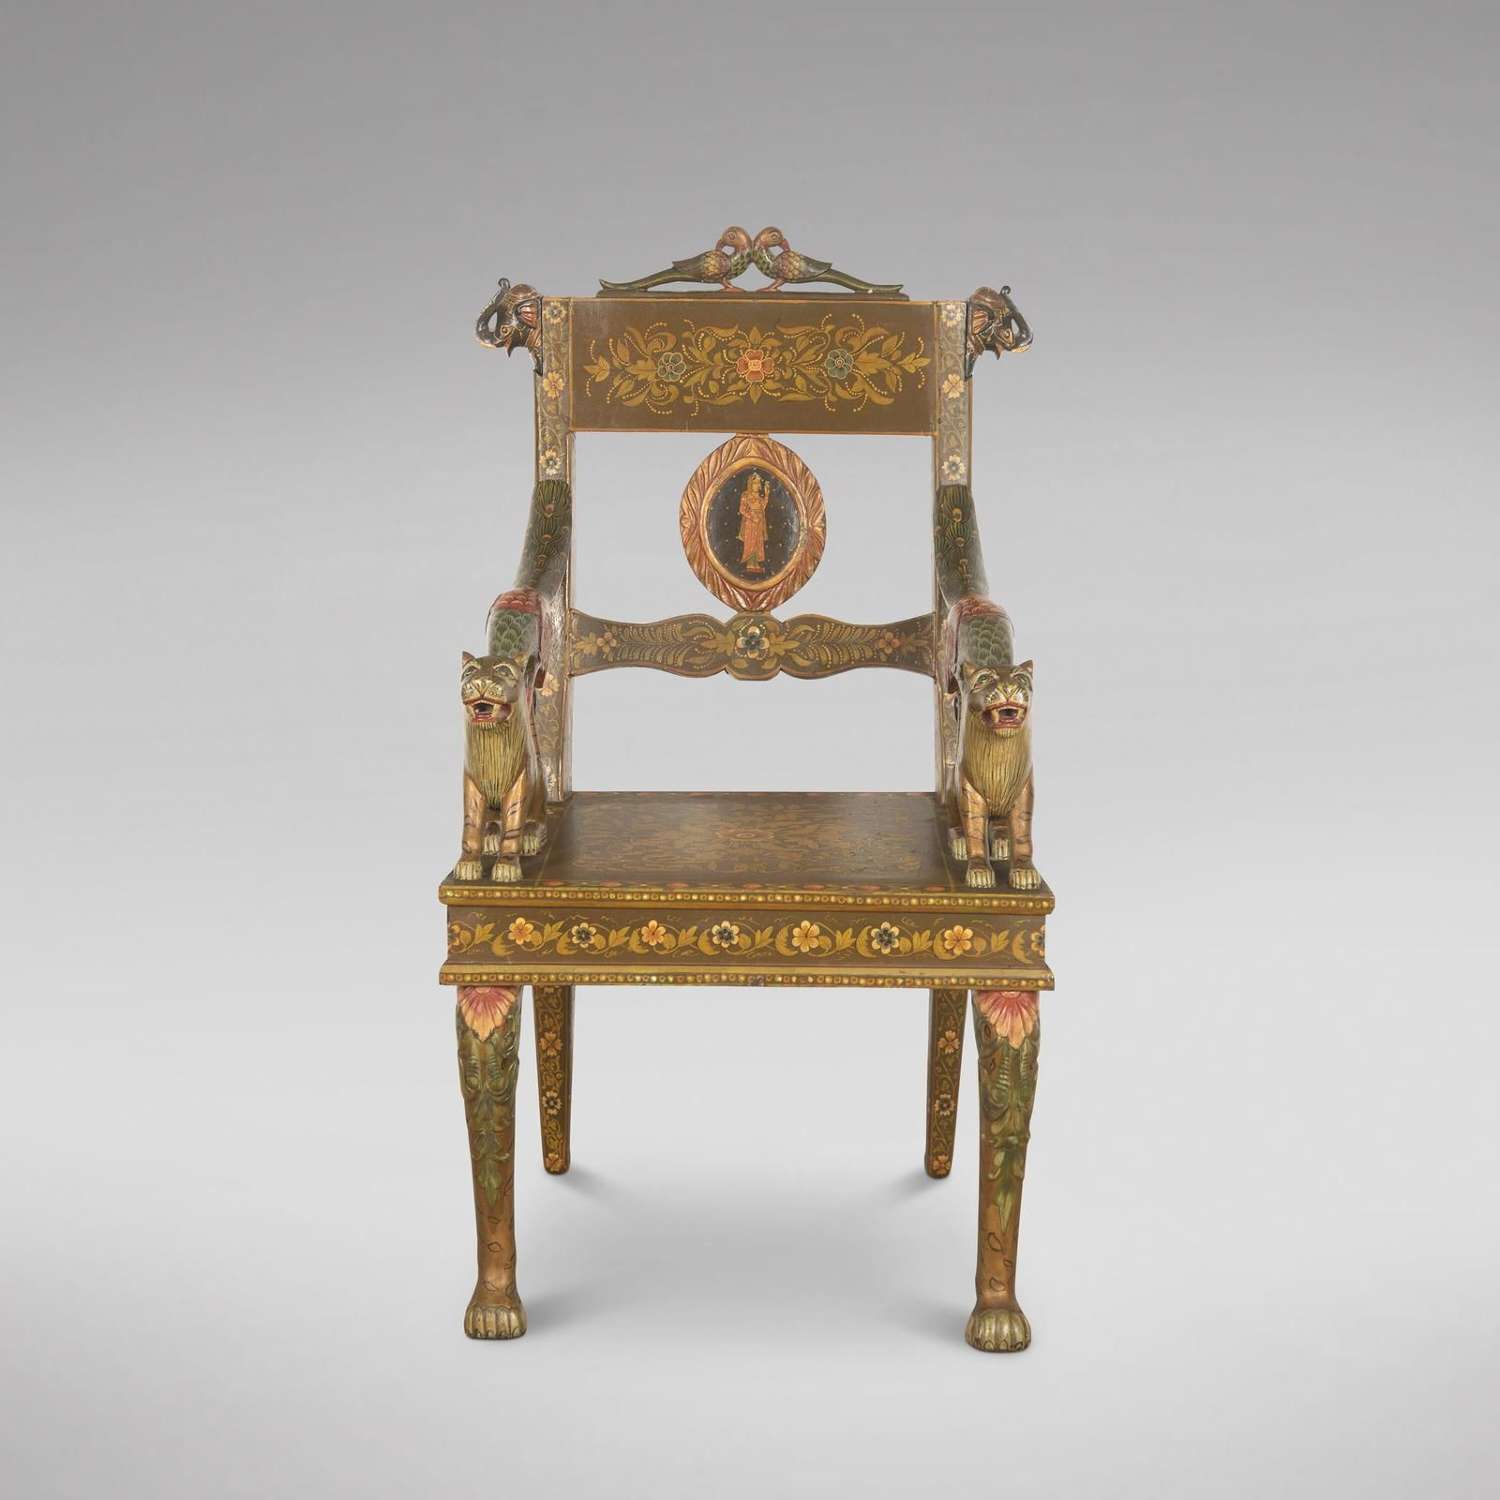 Early 20th Century Indian Hand-painted Chair